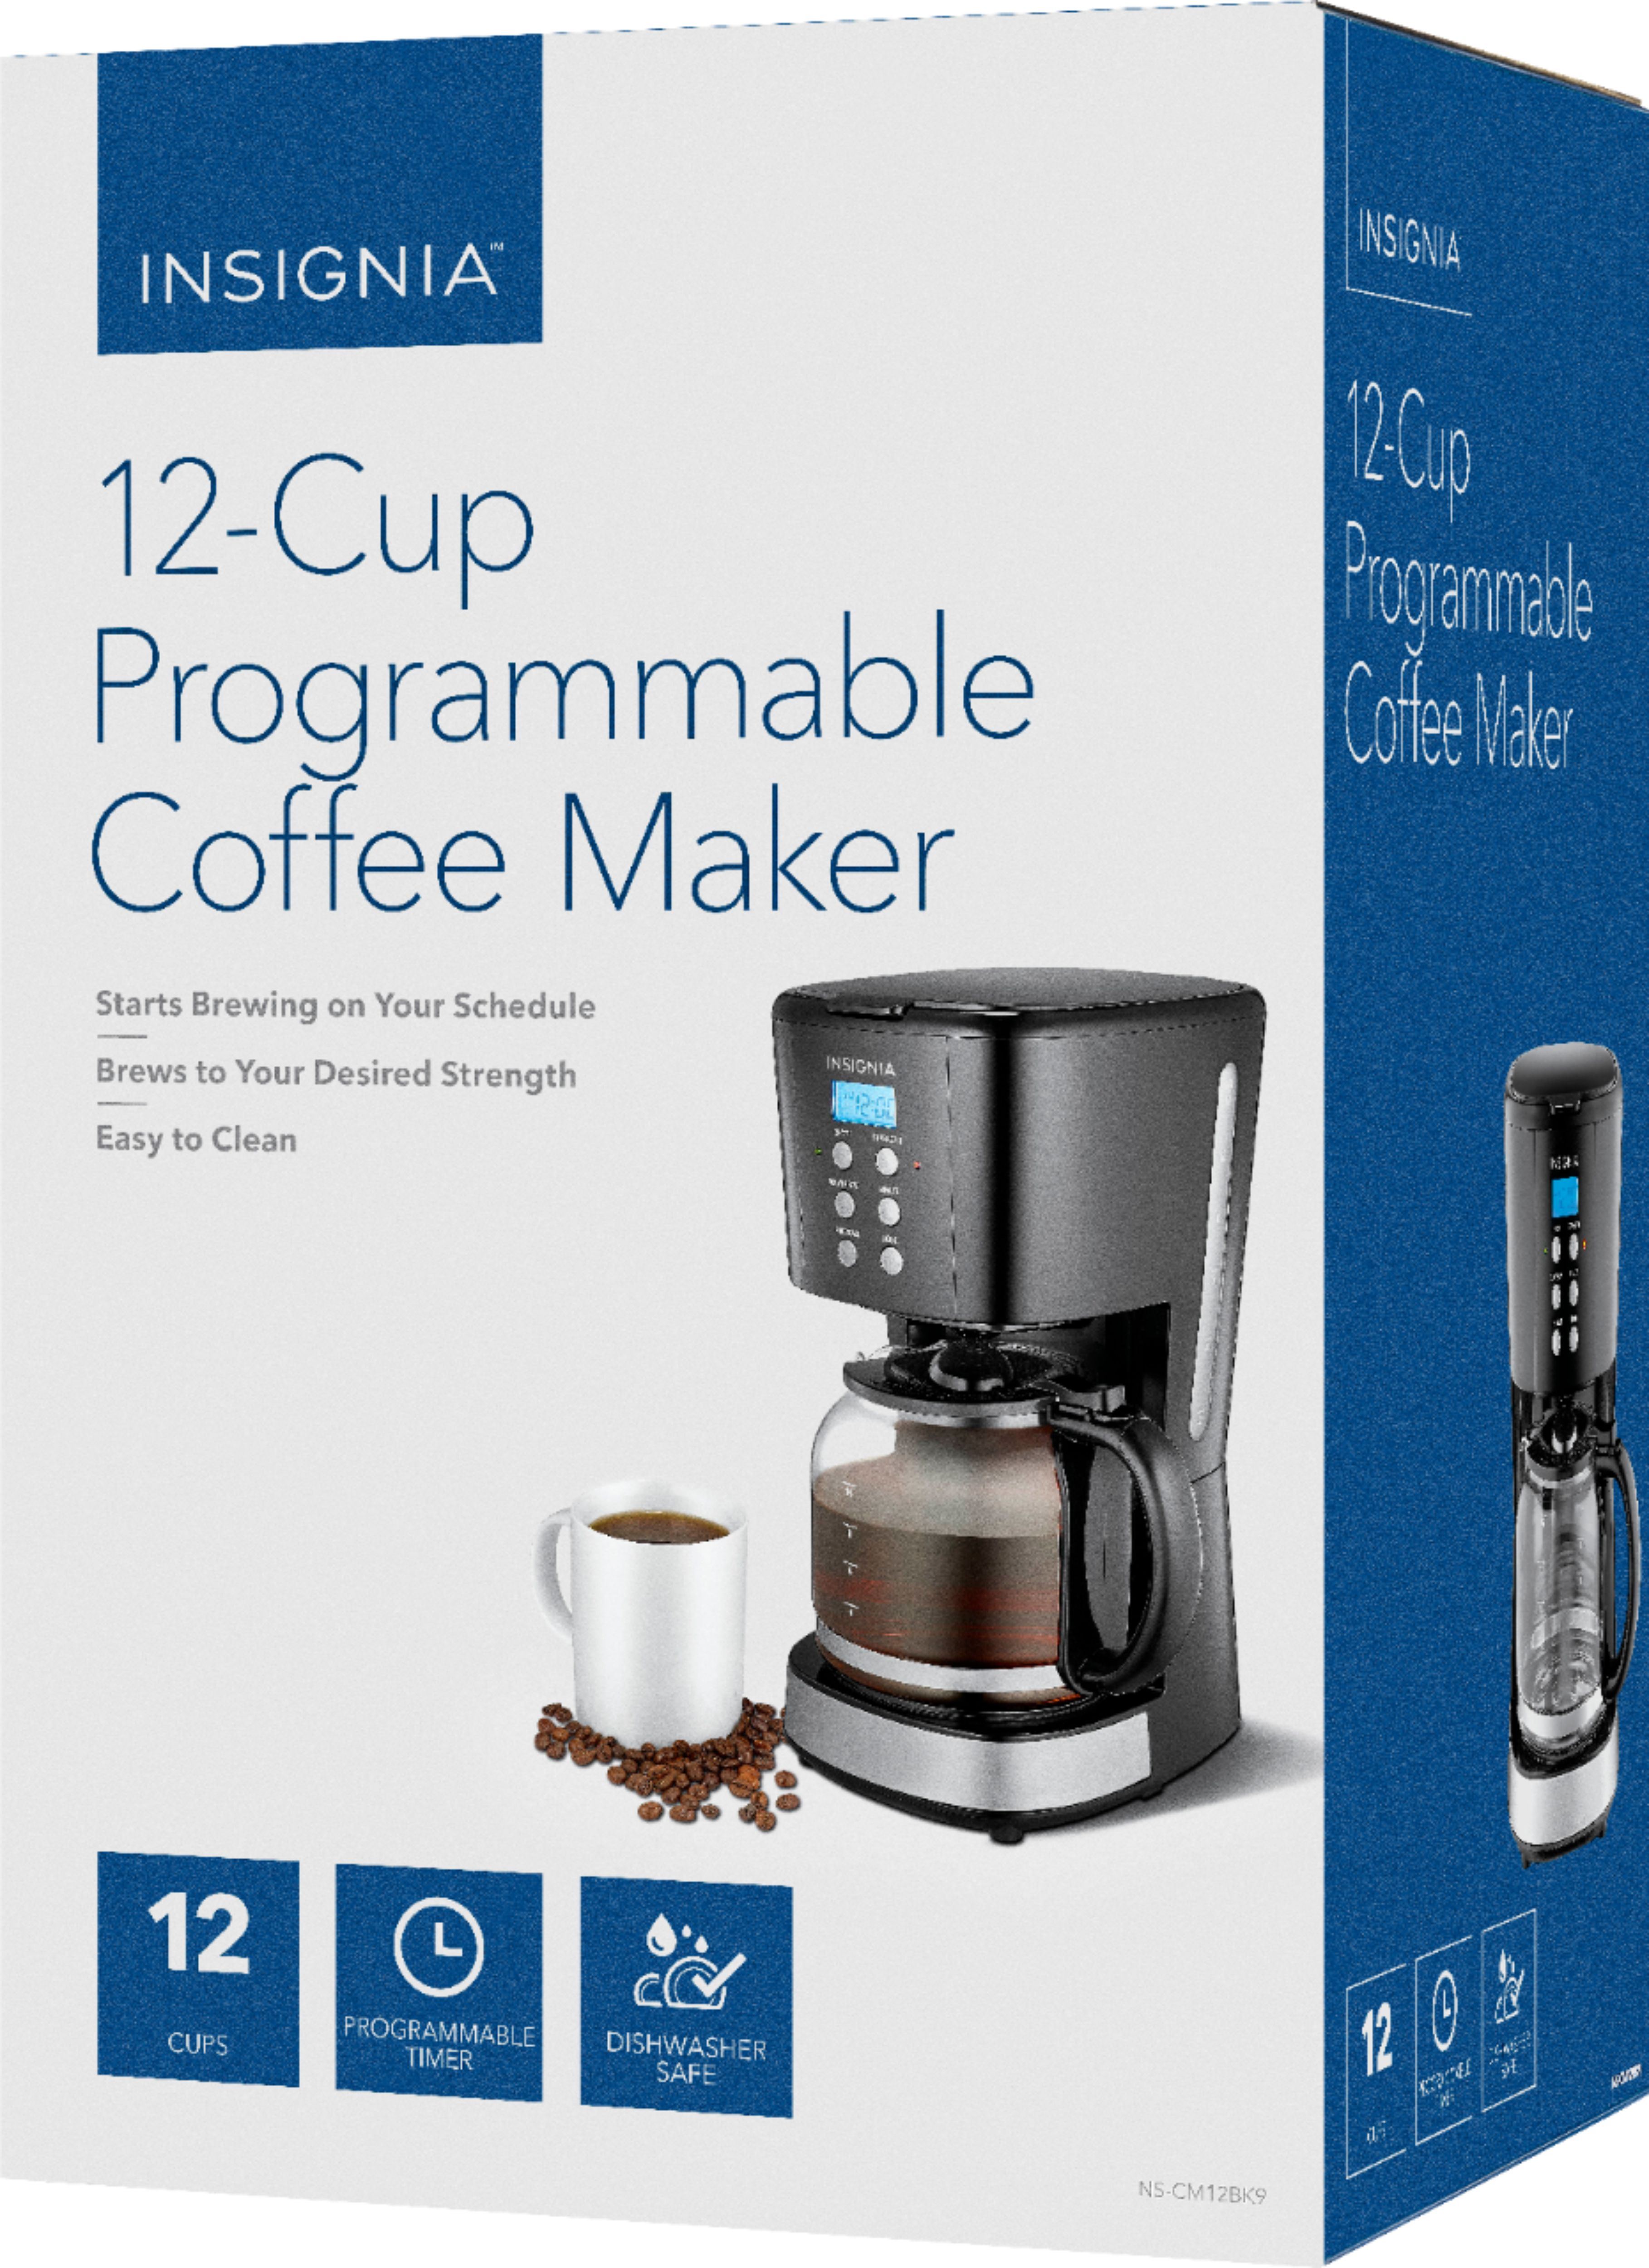 Advice on non-functioning 12 cup coffee maker